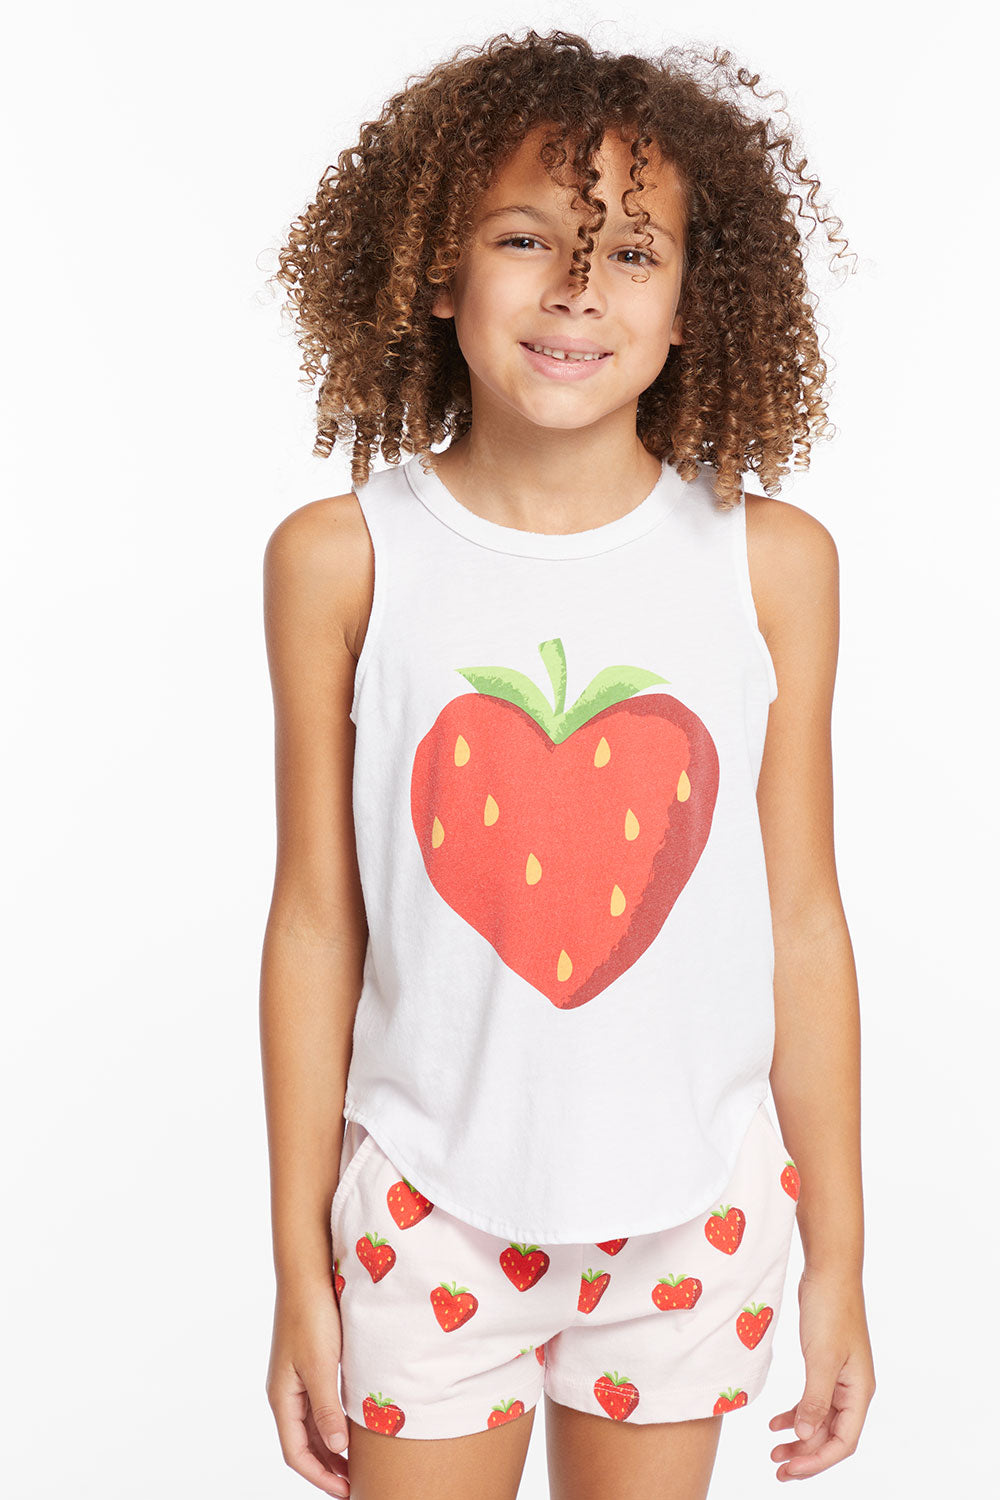 Heart Strawberry Girls Vintage Jersey Shirttail Muscle GIRLS chaserbrand